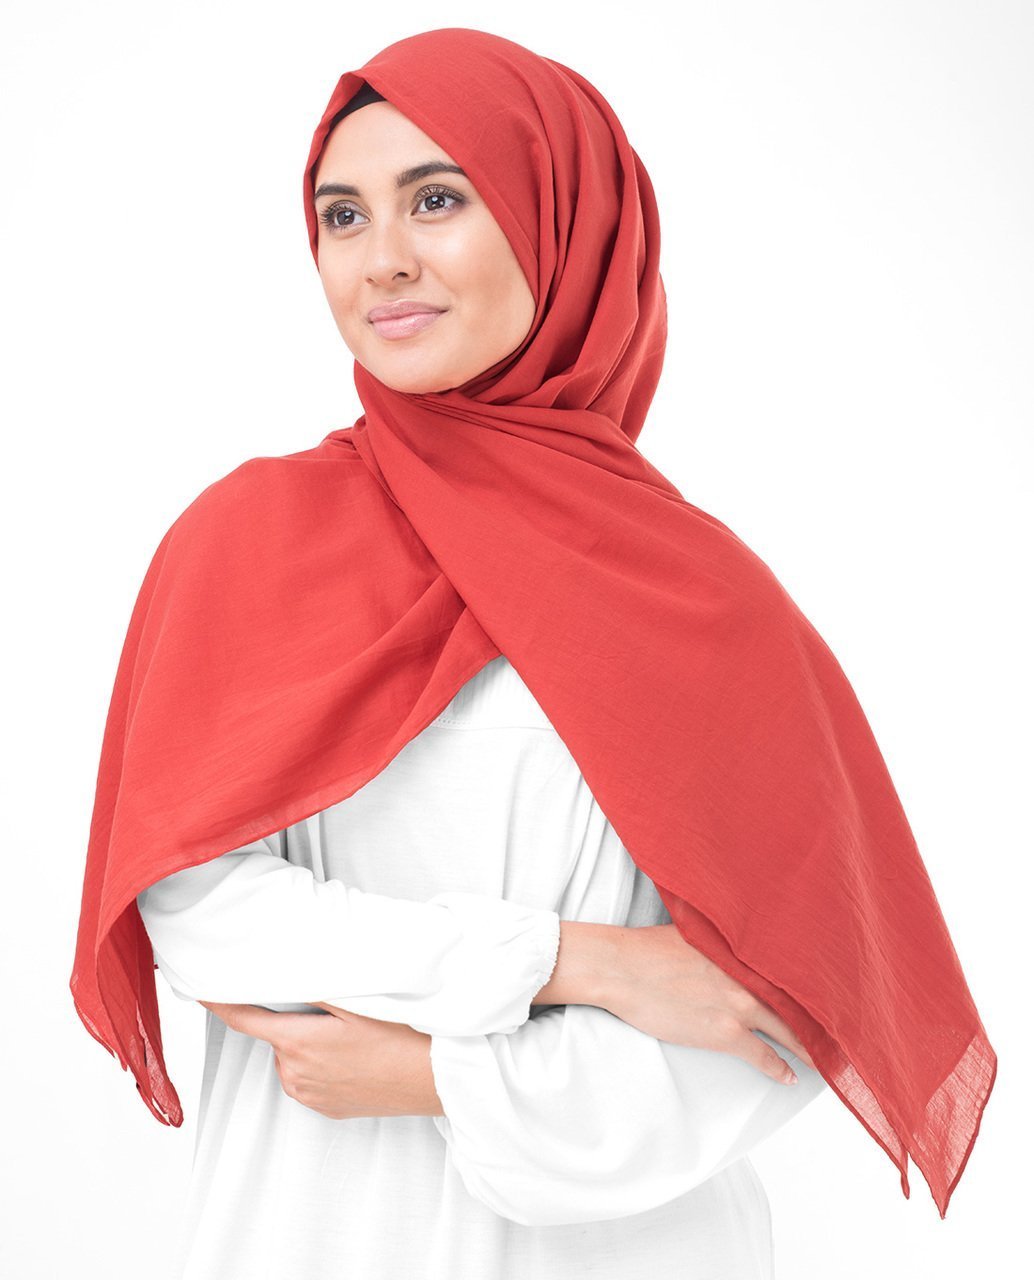 Cotton Voile Hijab in High Risk Red Color Regular High Risk Red 